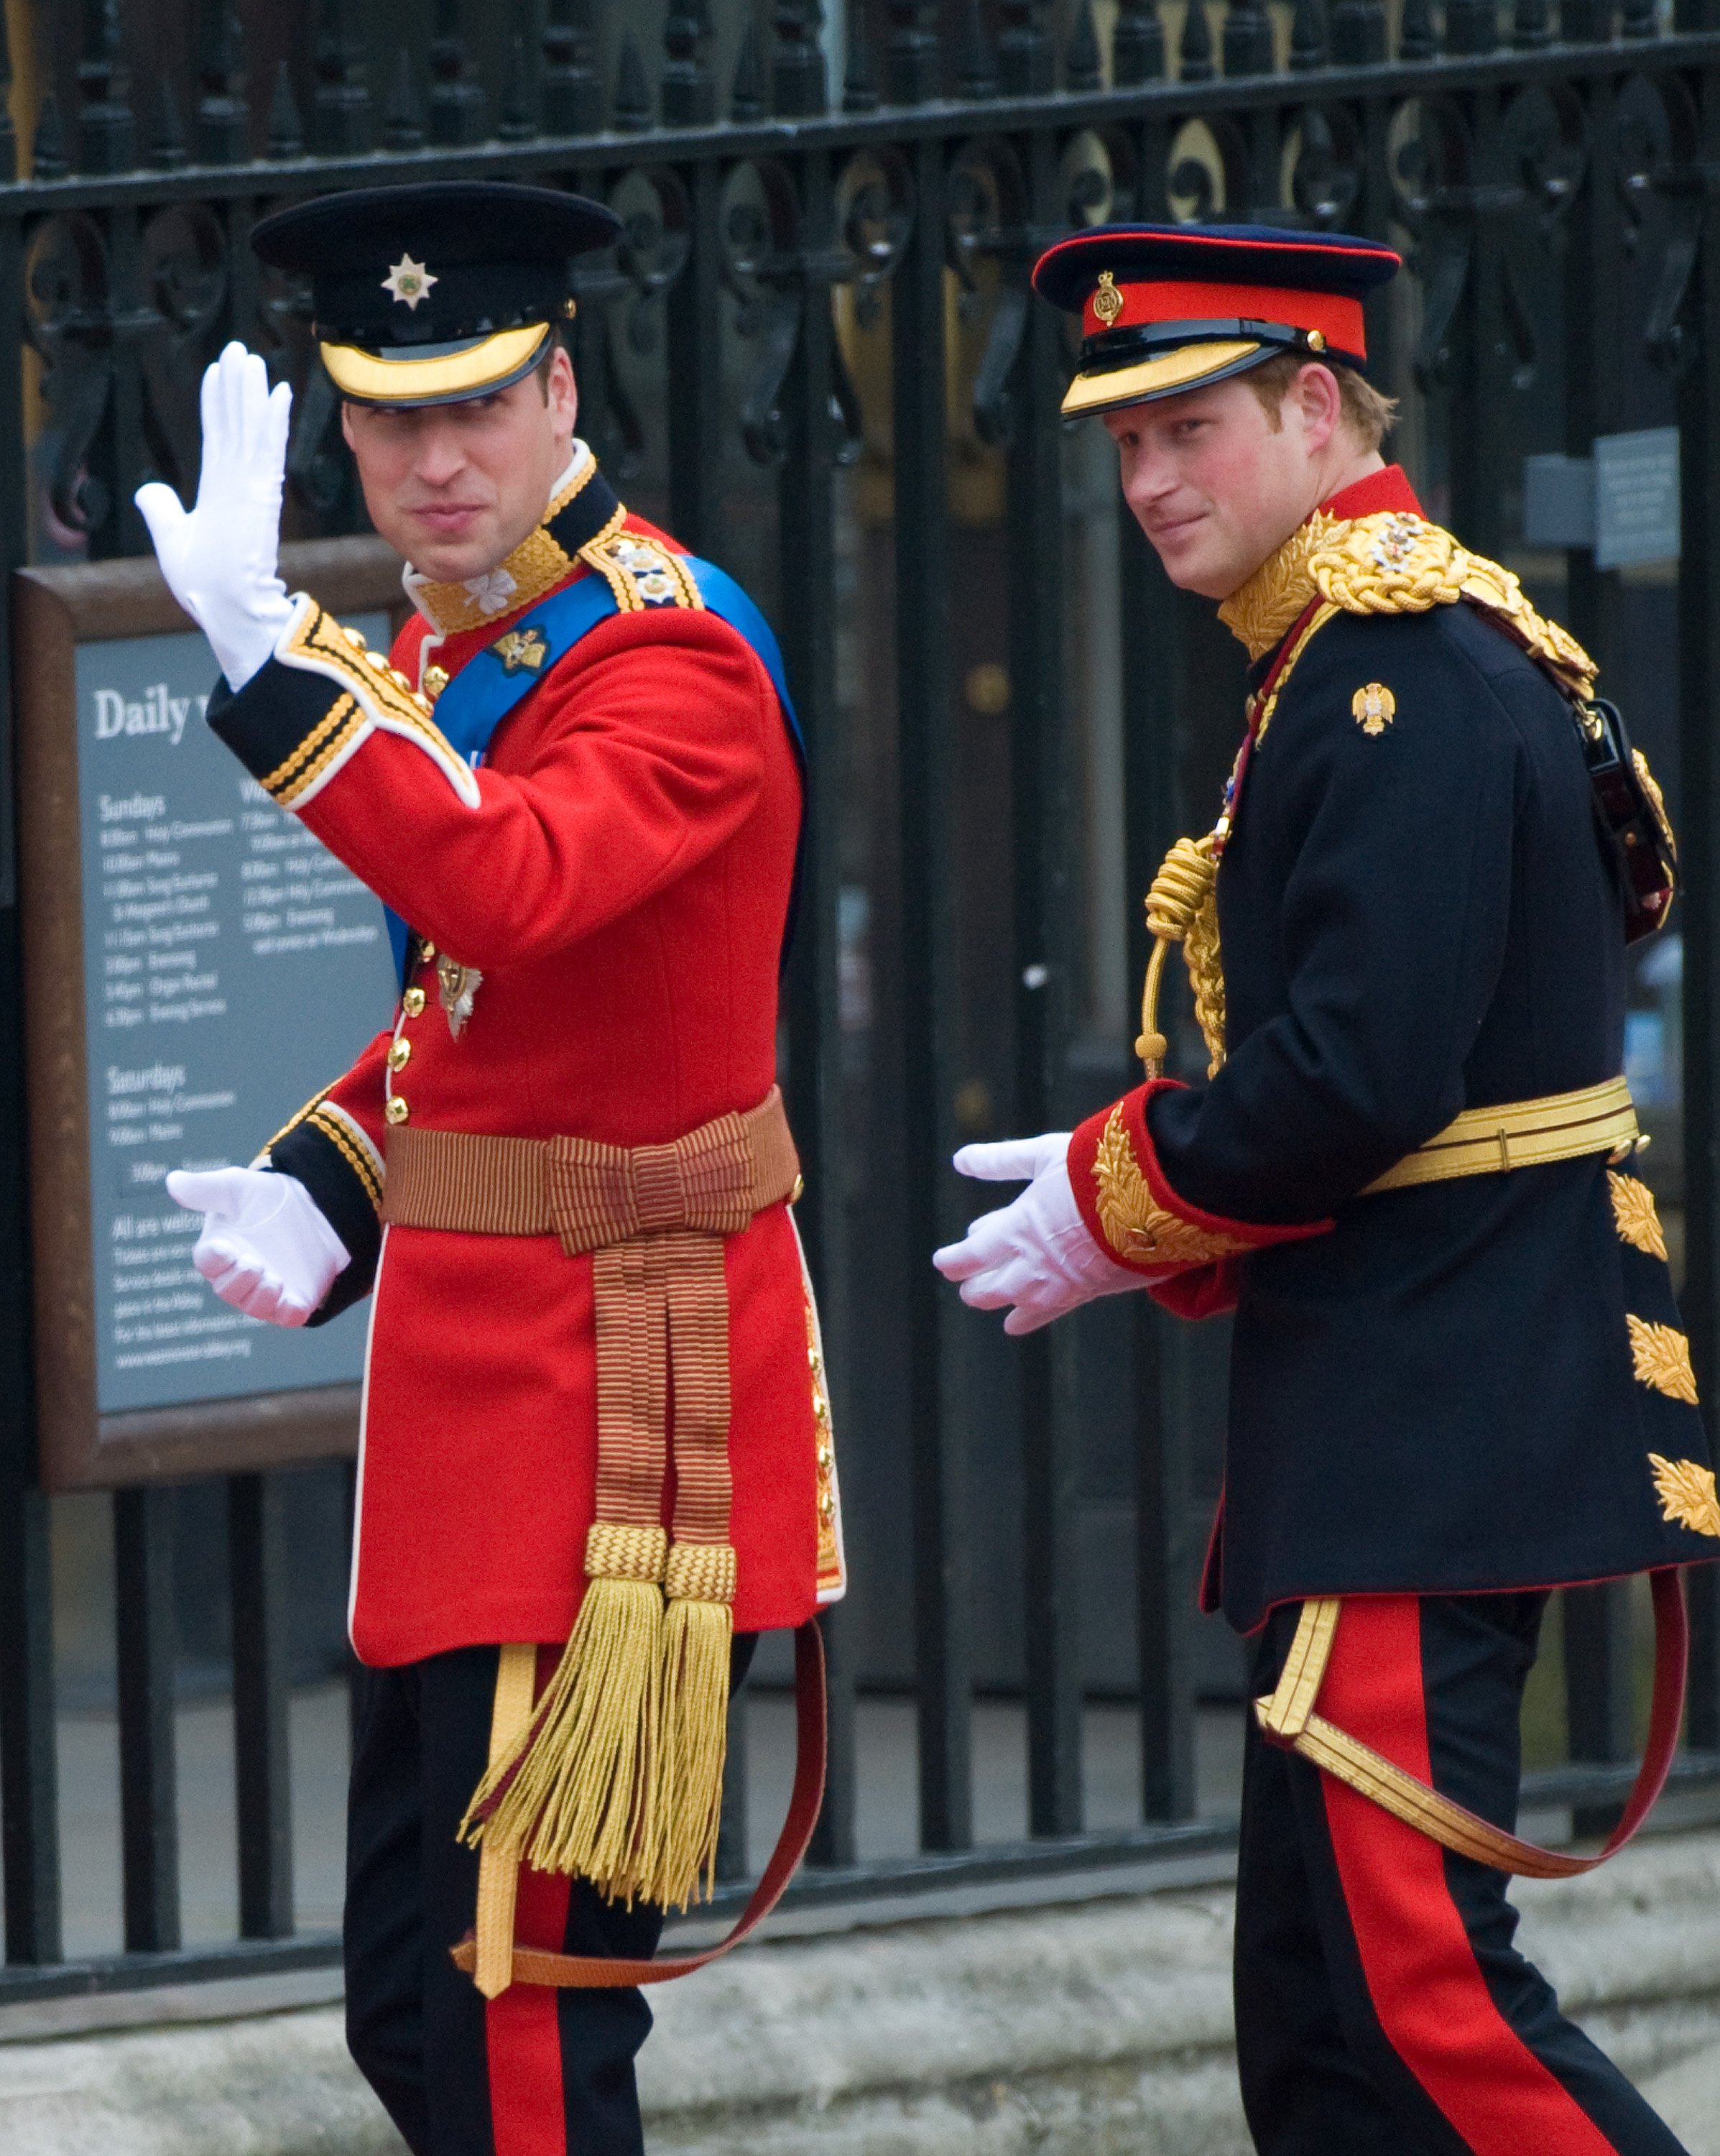 Prince William and Prince Harry arrive for William's royal wedding at Westminster Abbey